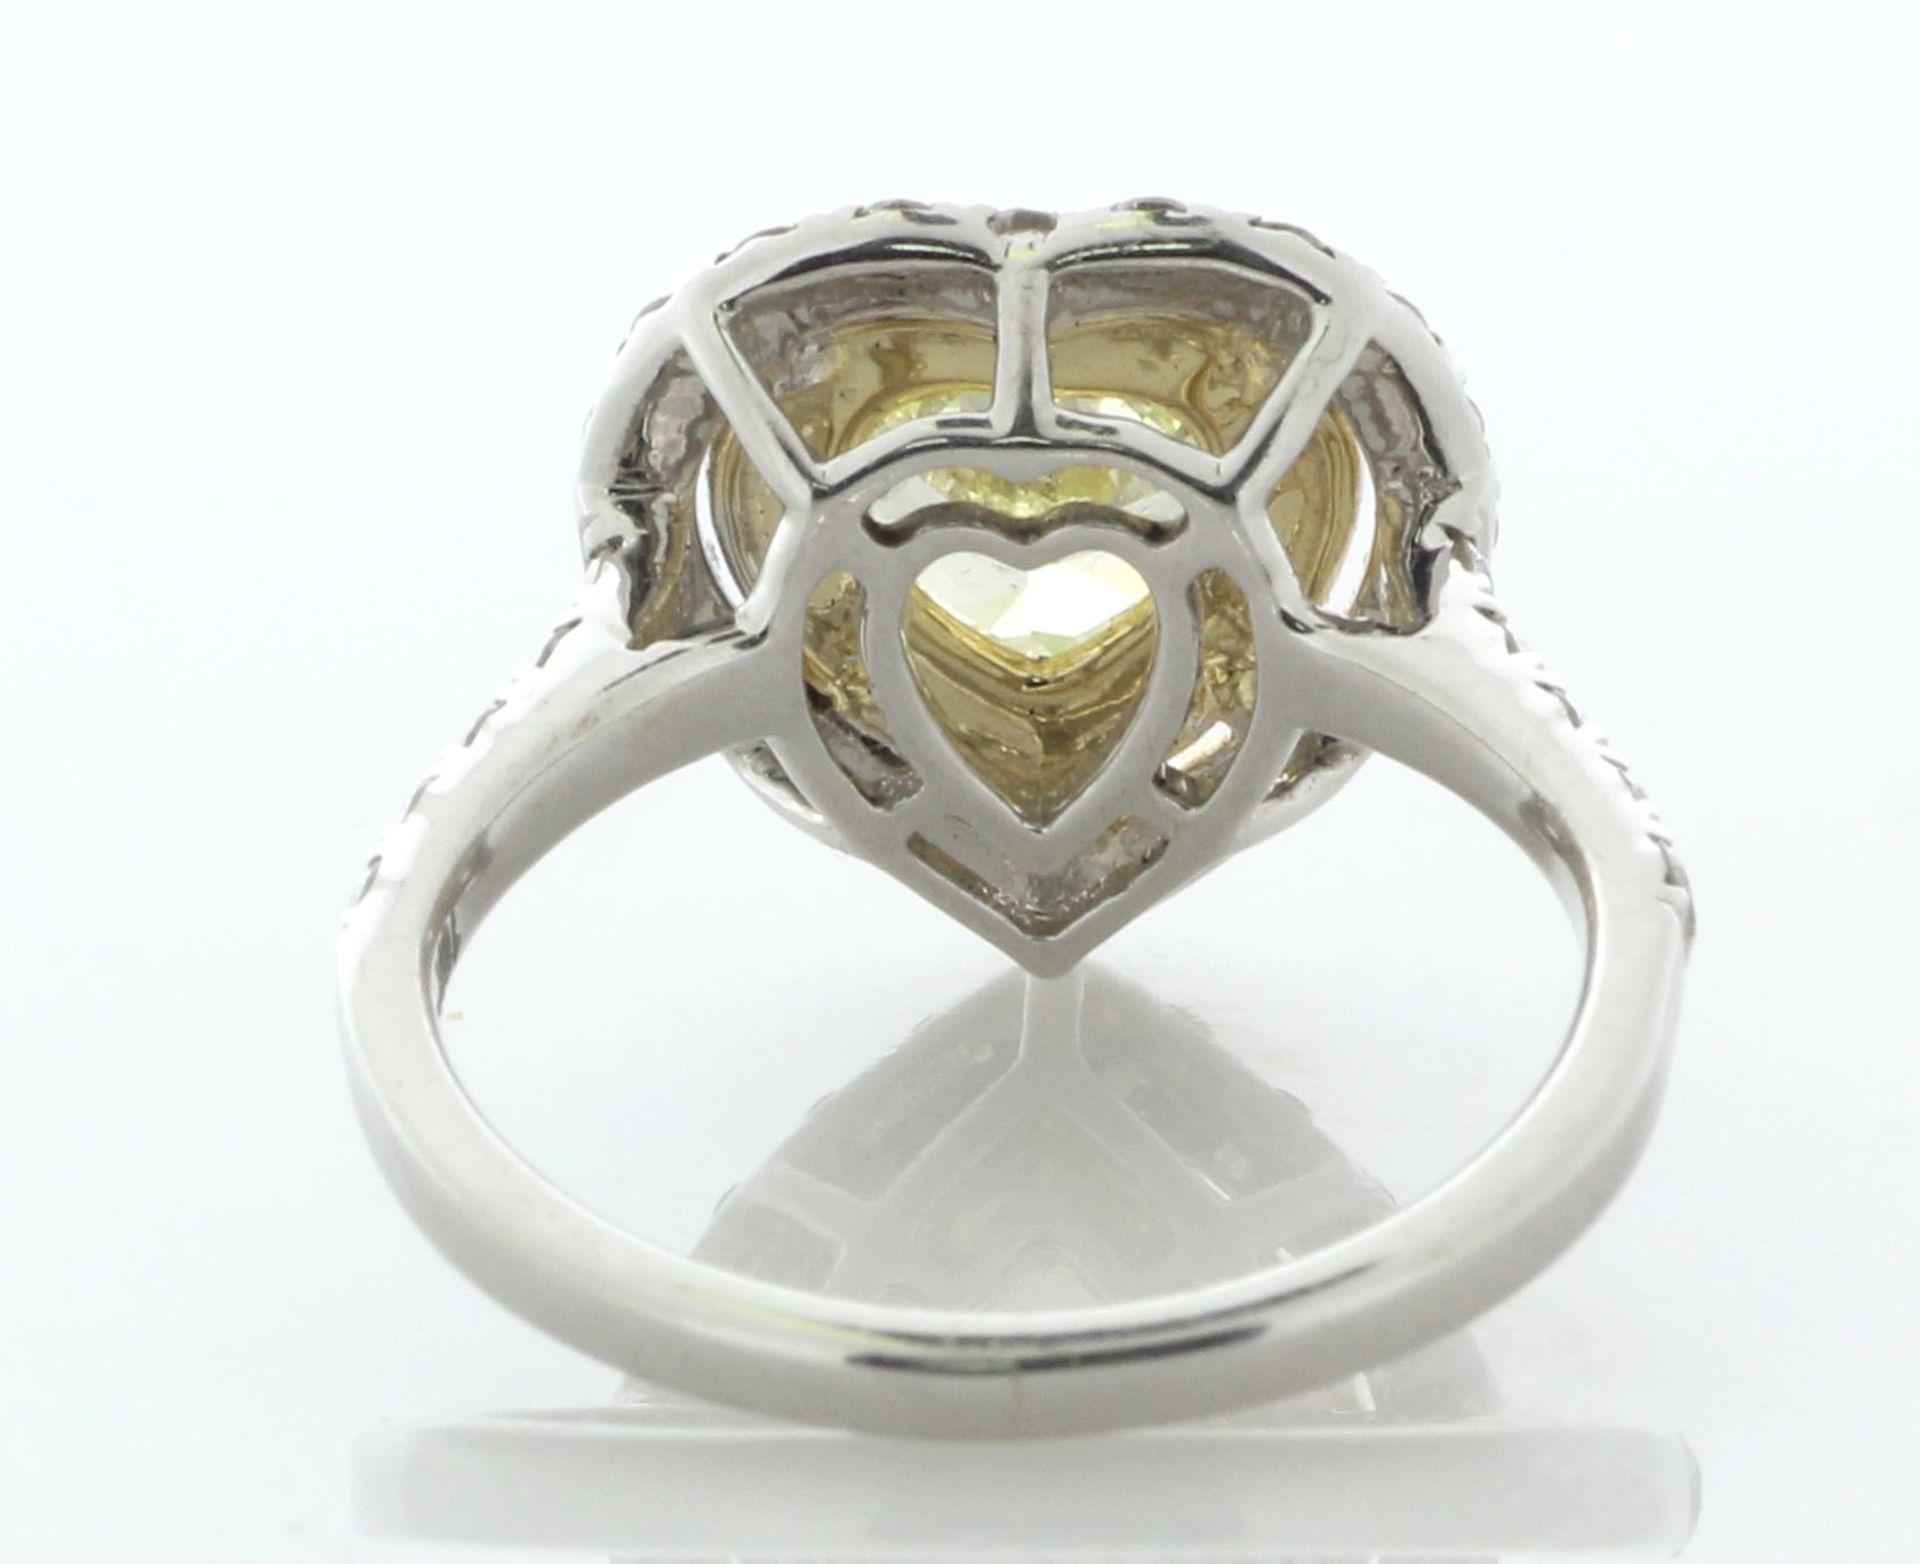 18ct White Gold Heart Shaped Cluster Diamond Ring (1.04) 1.79 Carats - Valued By AGI £17,400.00 - - Image 5 of 6